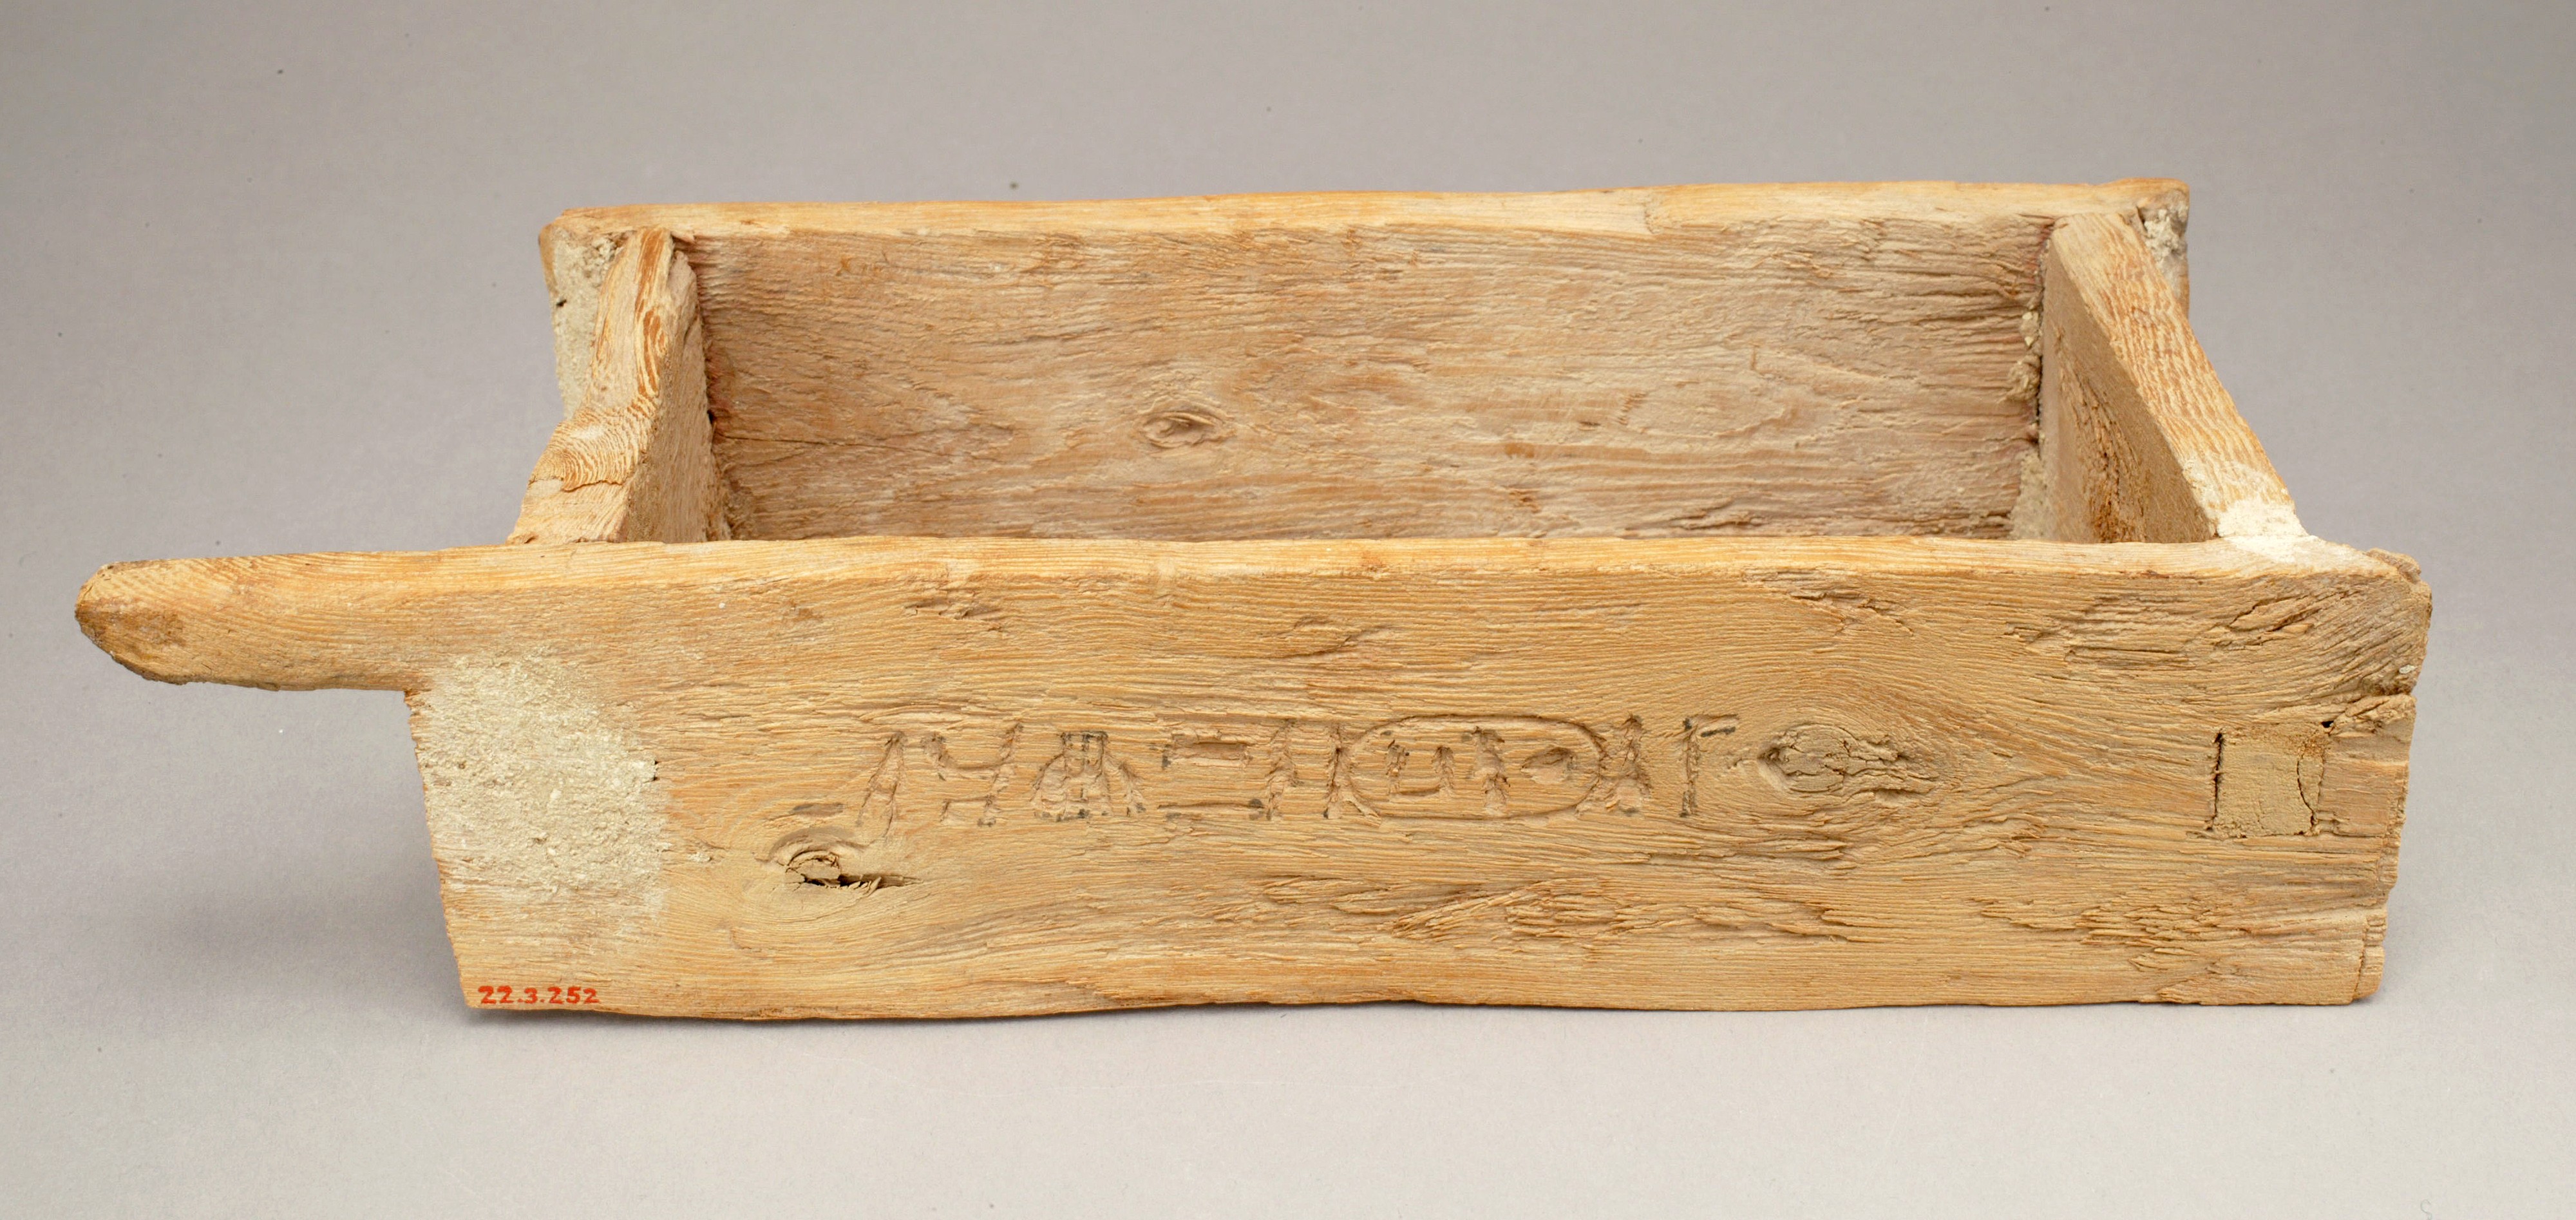 Brick Mold from a Foundation Deposit for Hatshepsut's Temple